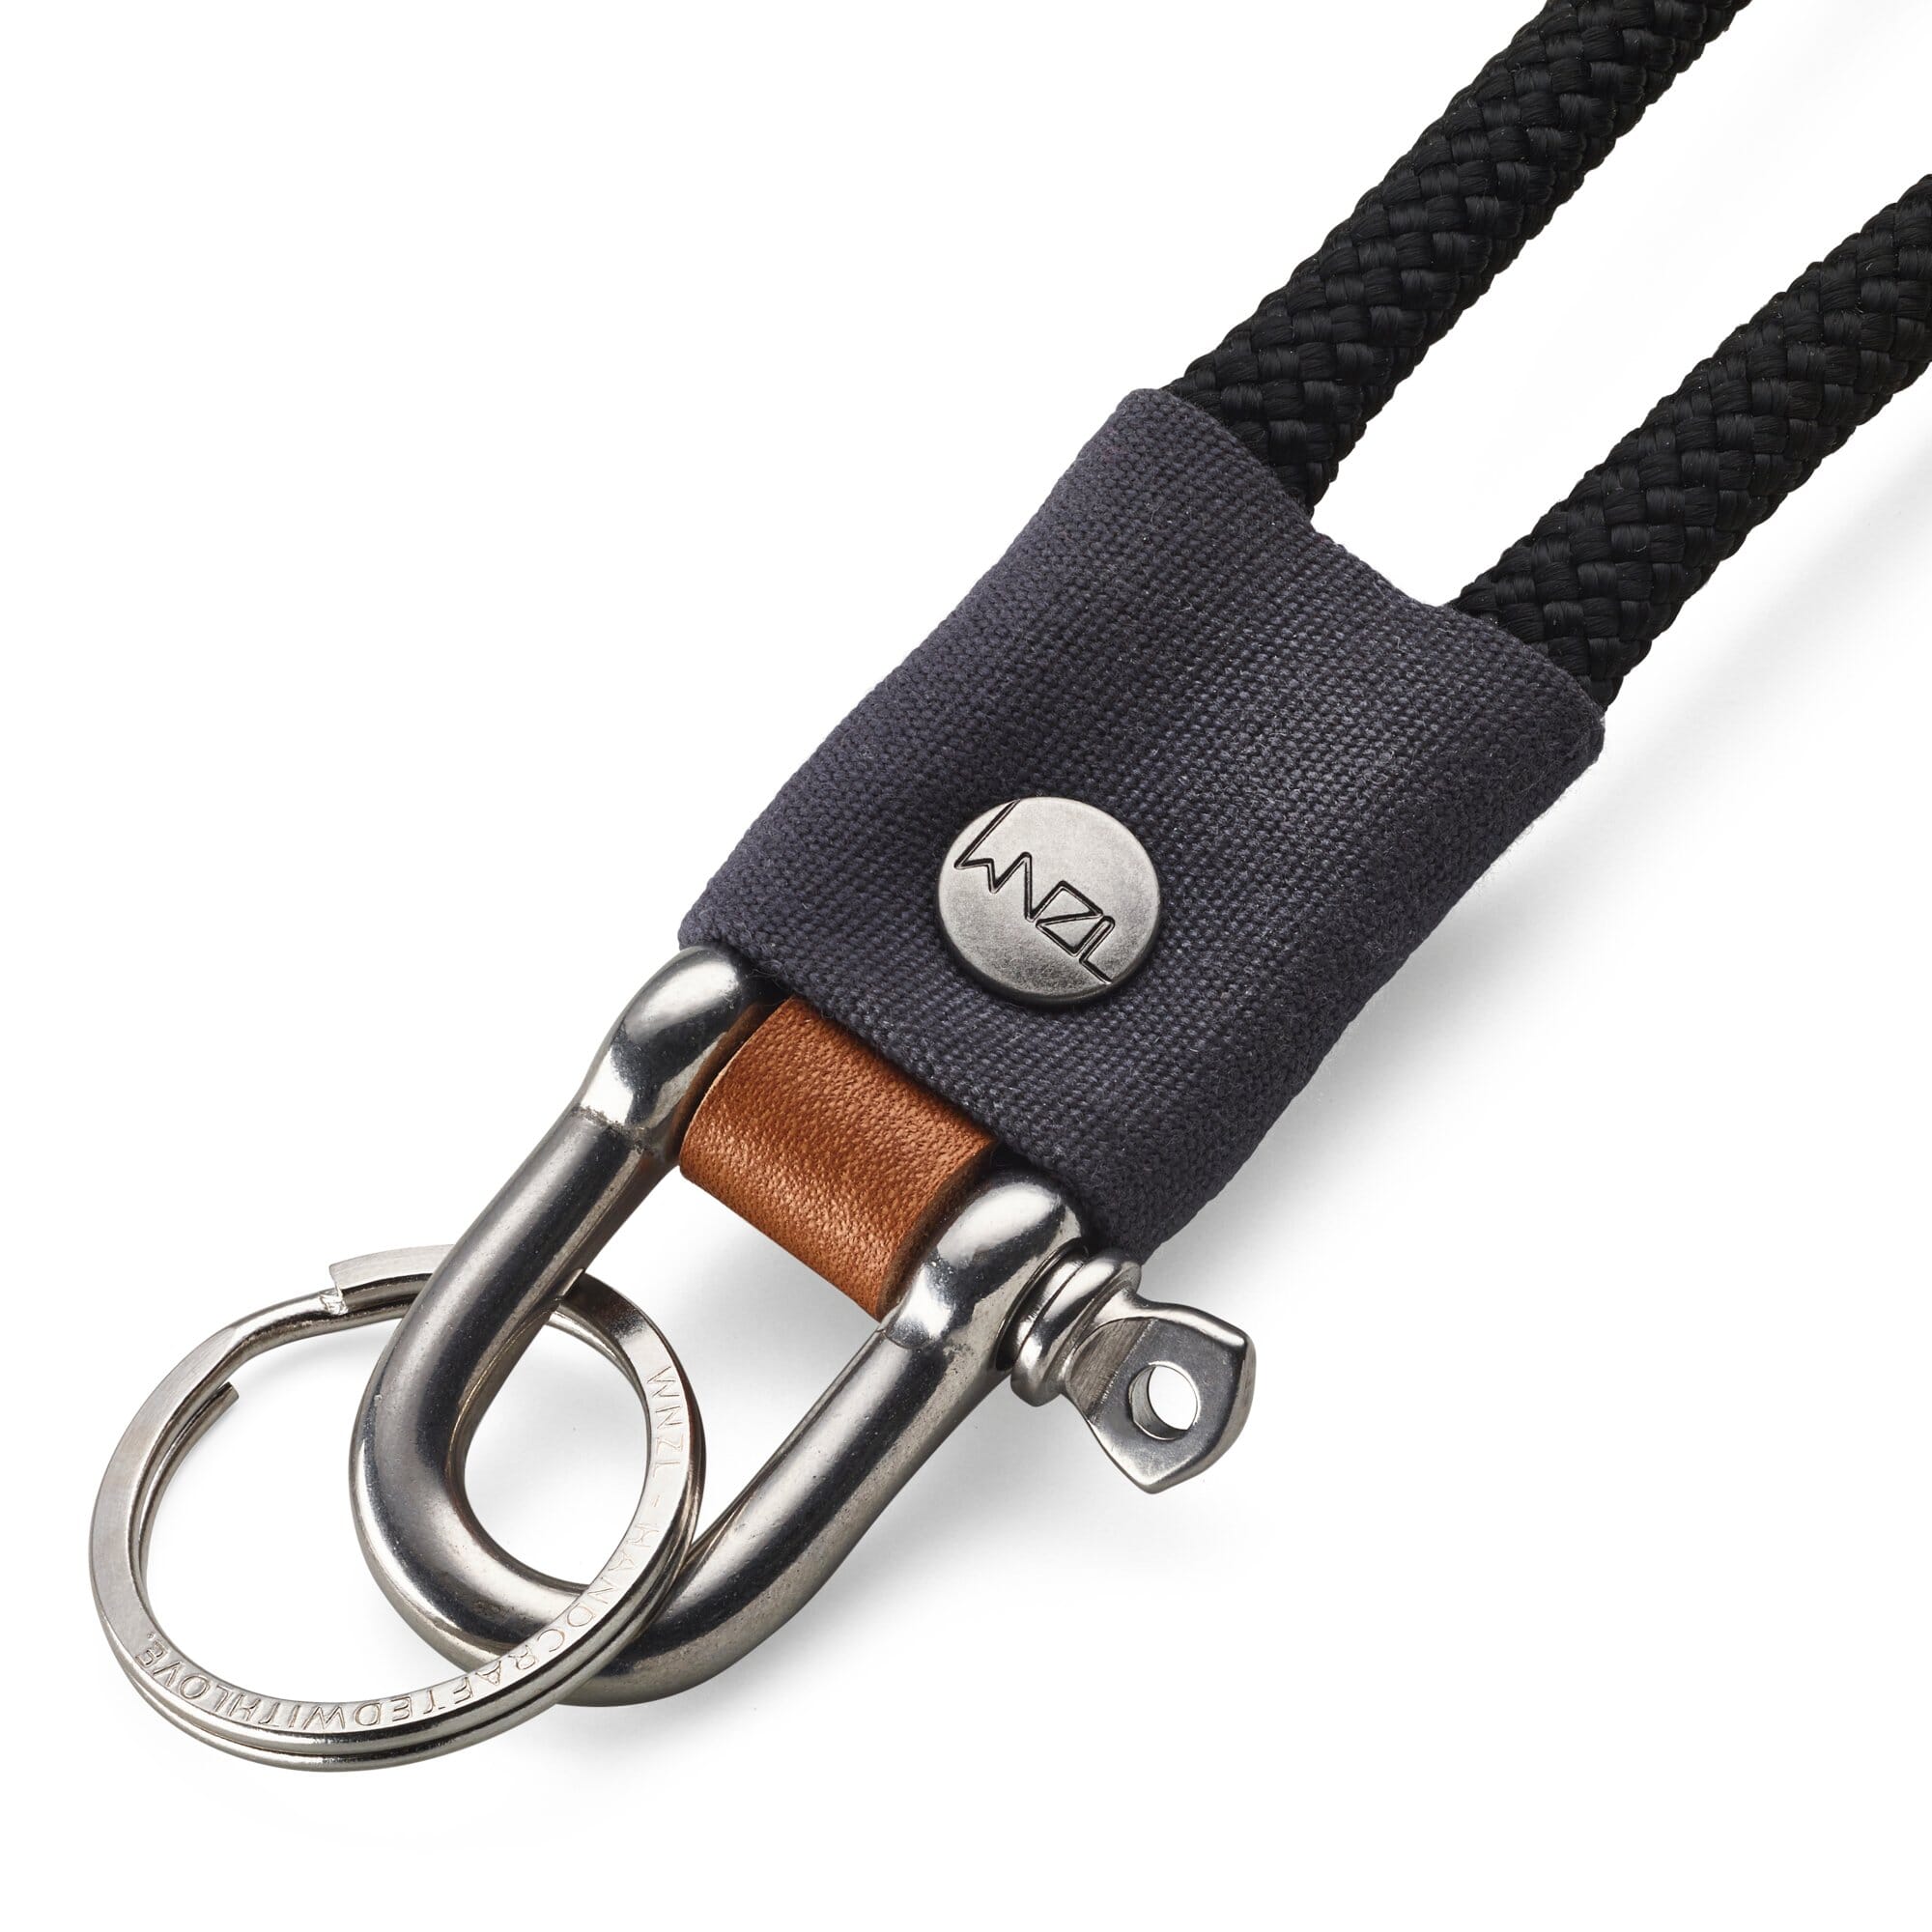 Dual key chain with belt clip